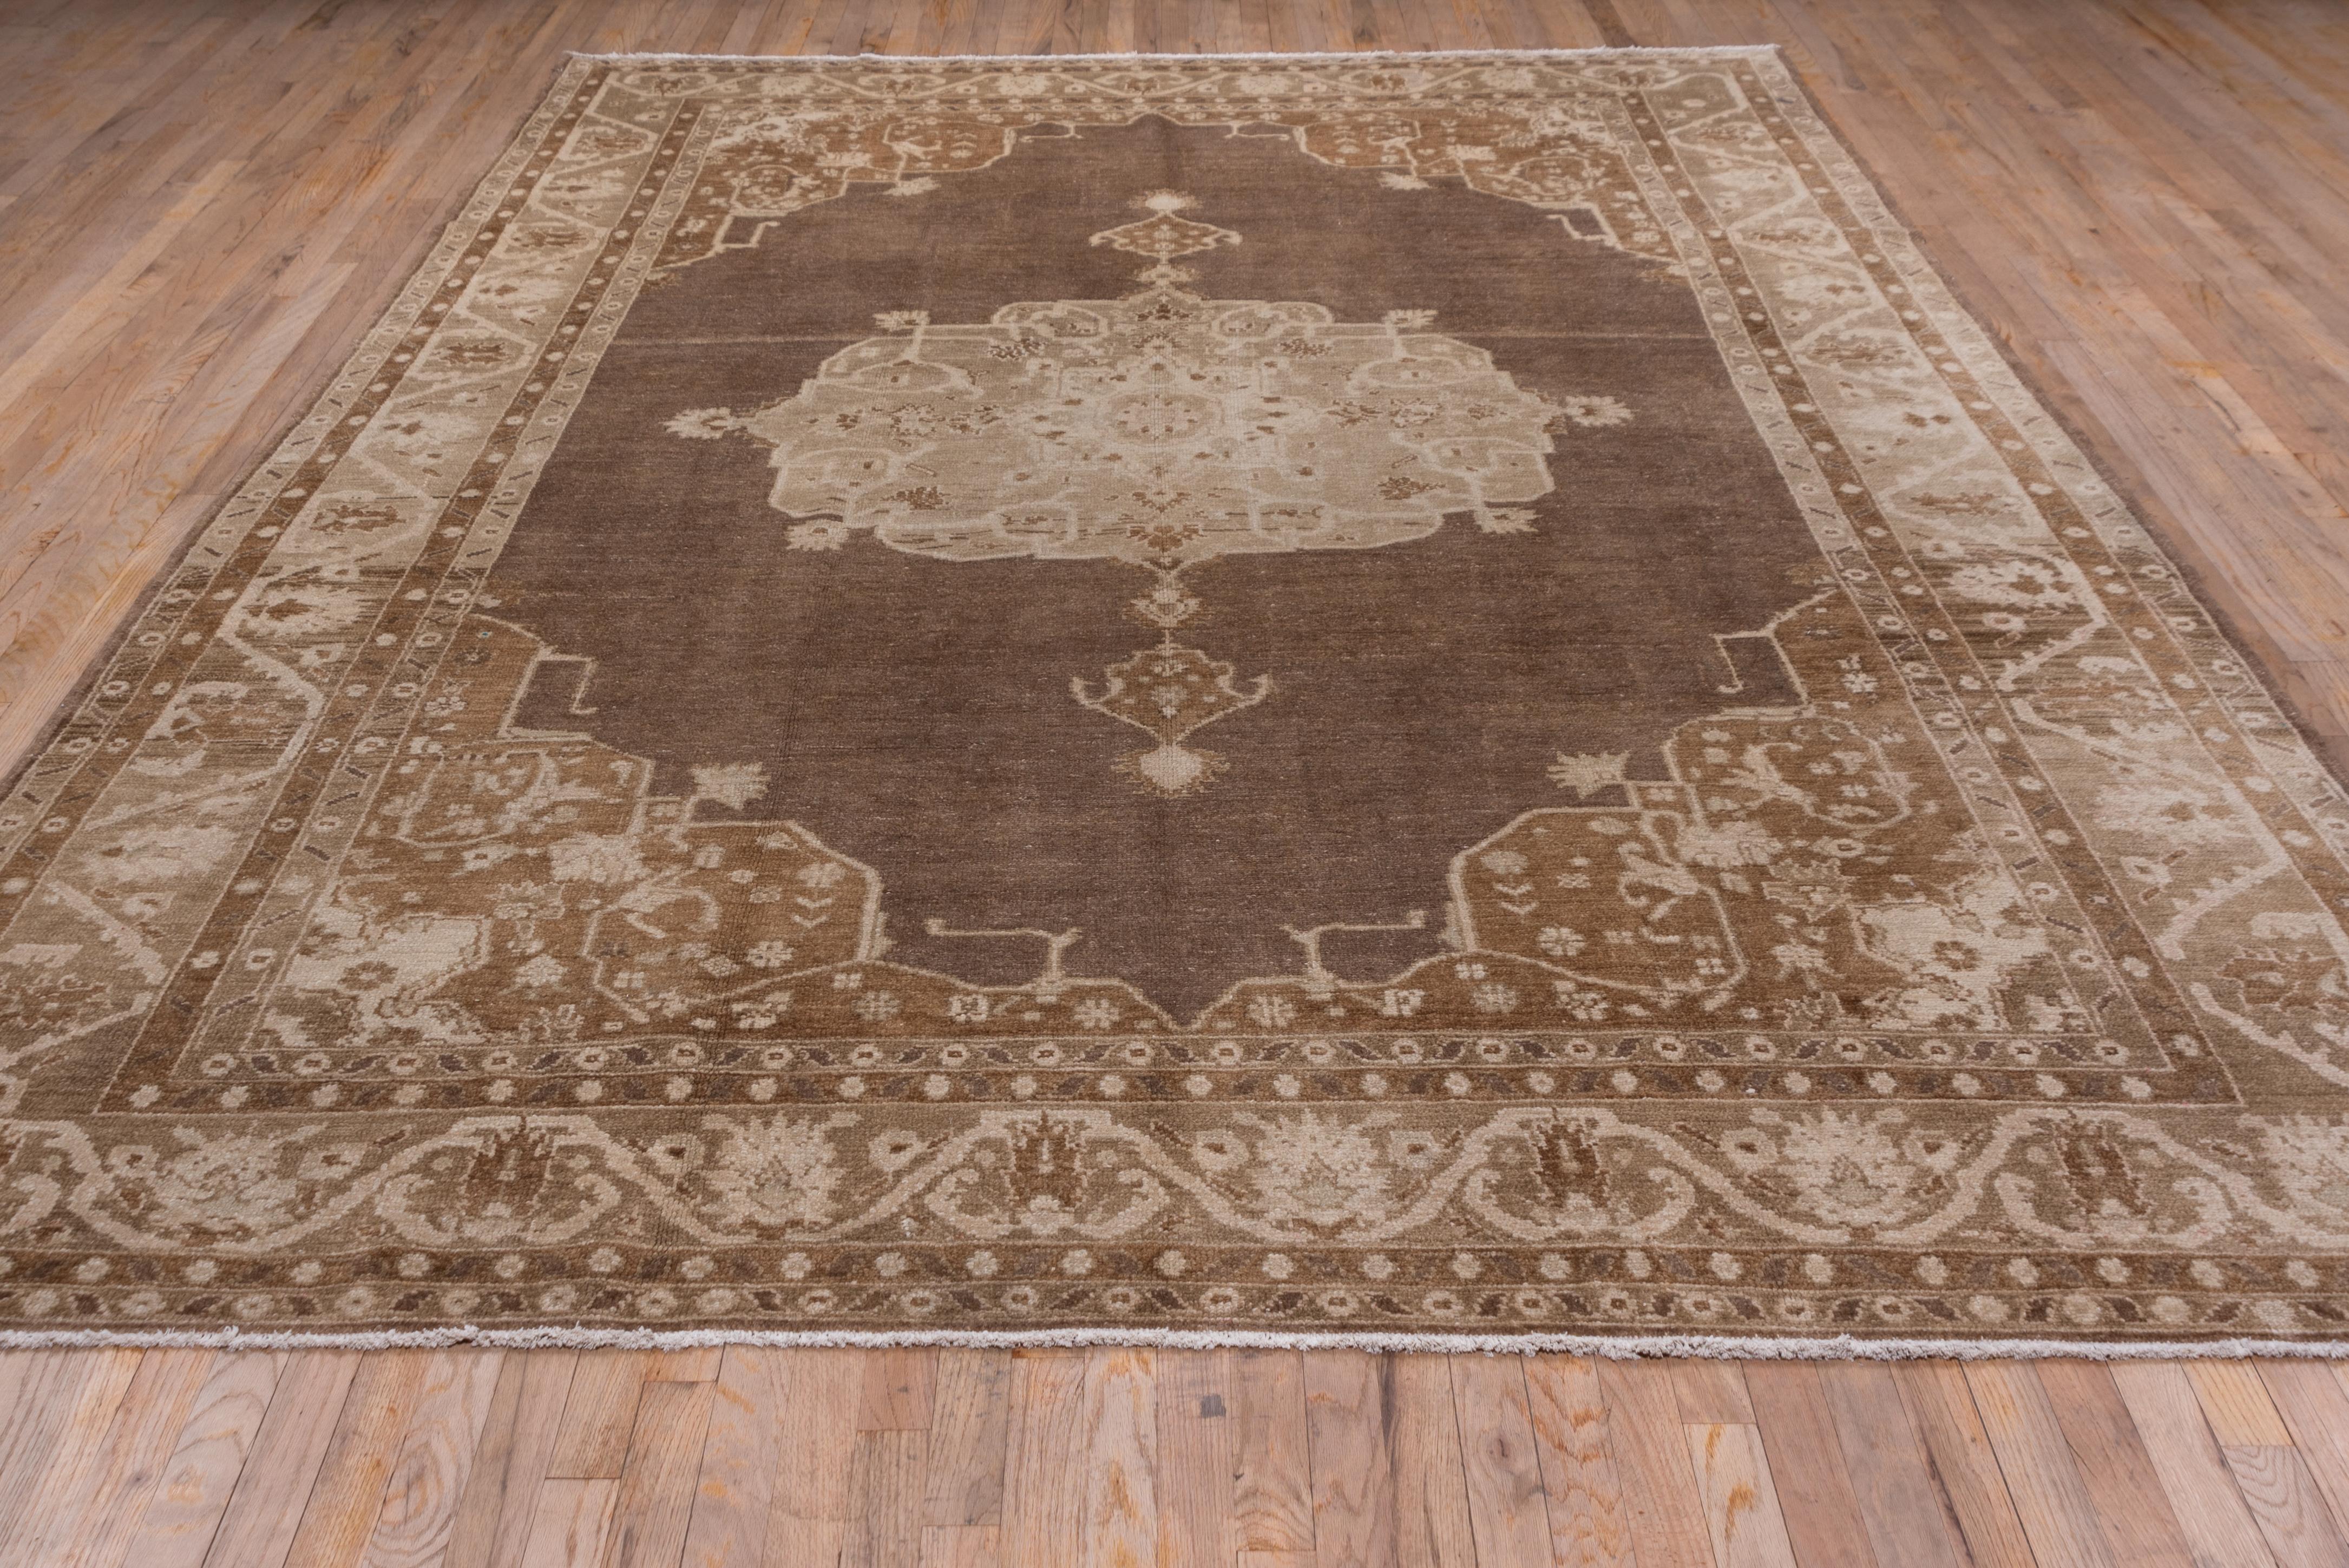 Wool Antique Turkish Oushak Carpet, Brown Field, Light Brown Borders, Circa 1930s For Sale